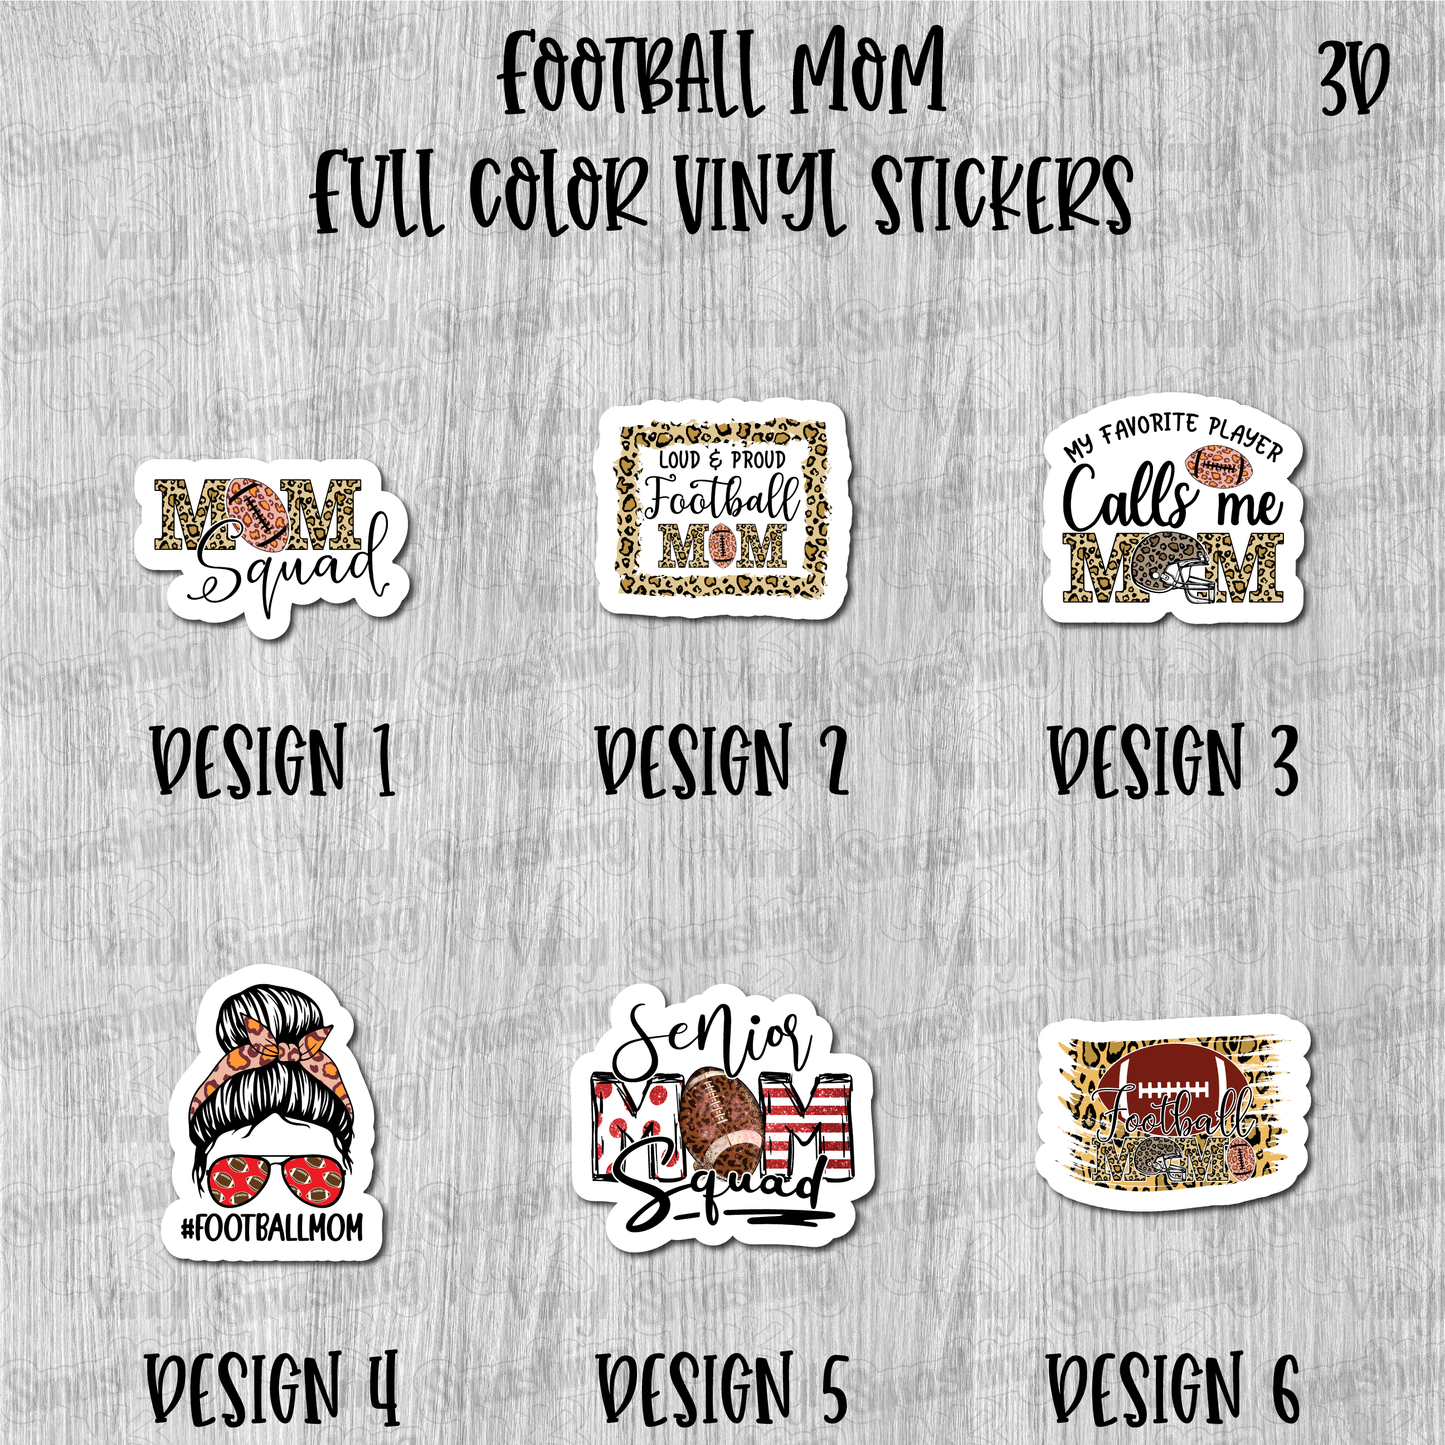 Football Mom - Full Color Vinyl Stickers (SHIPS IN 3-7 BUS DAYS)